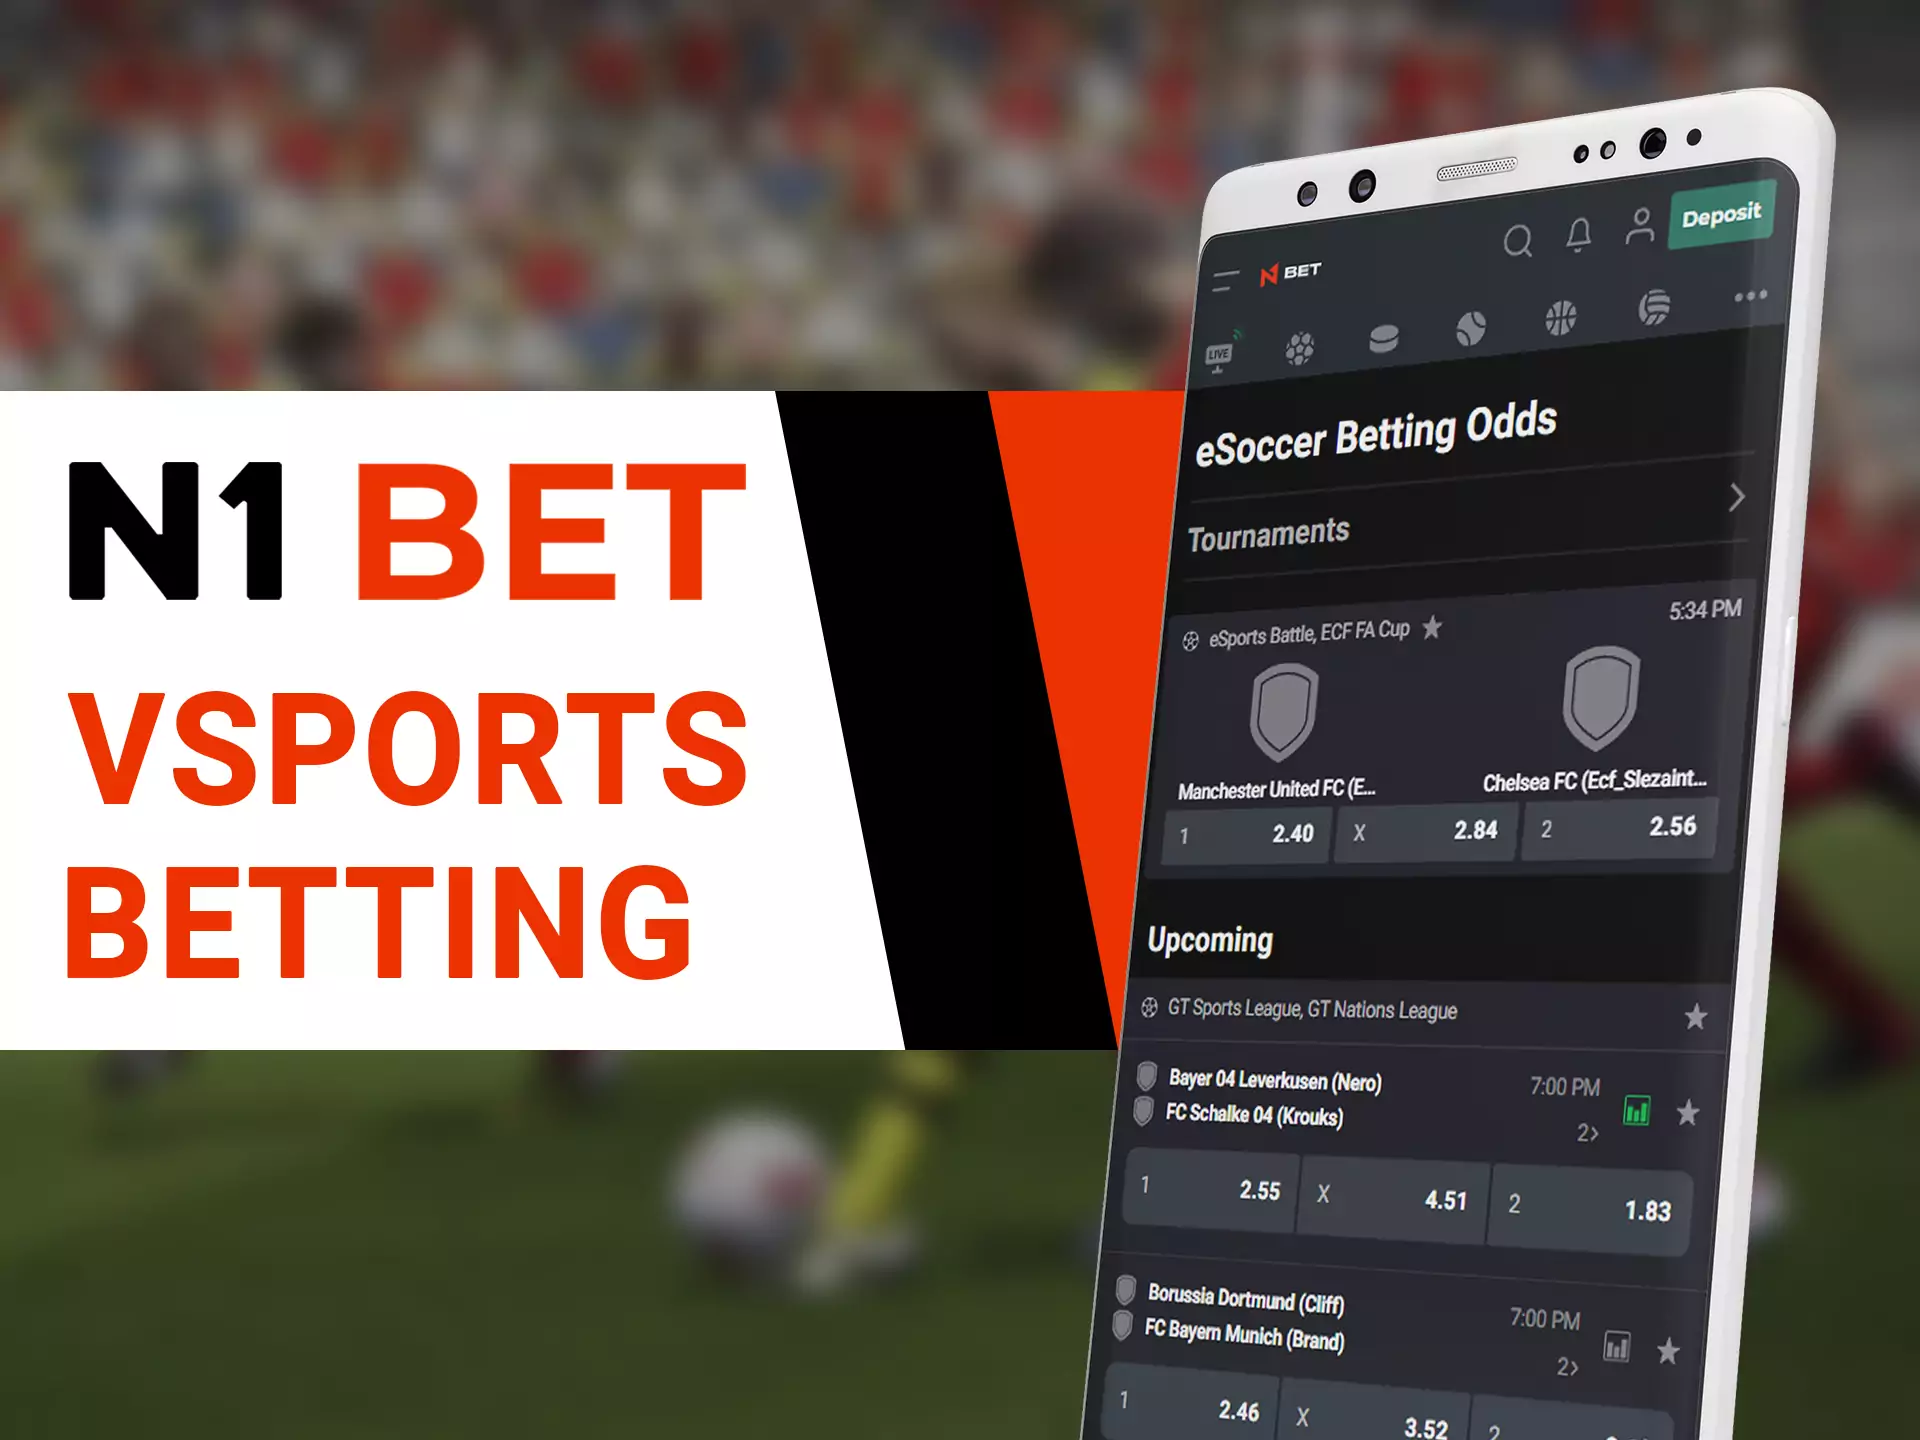 Bet on virtual sports using N1Bet app and win big prizes.